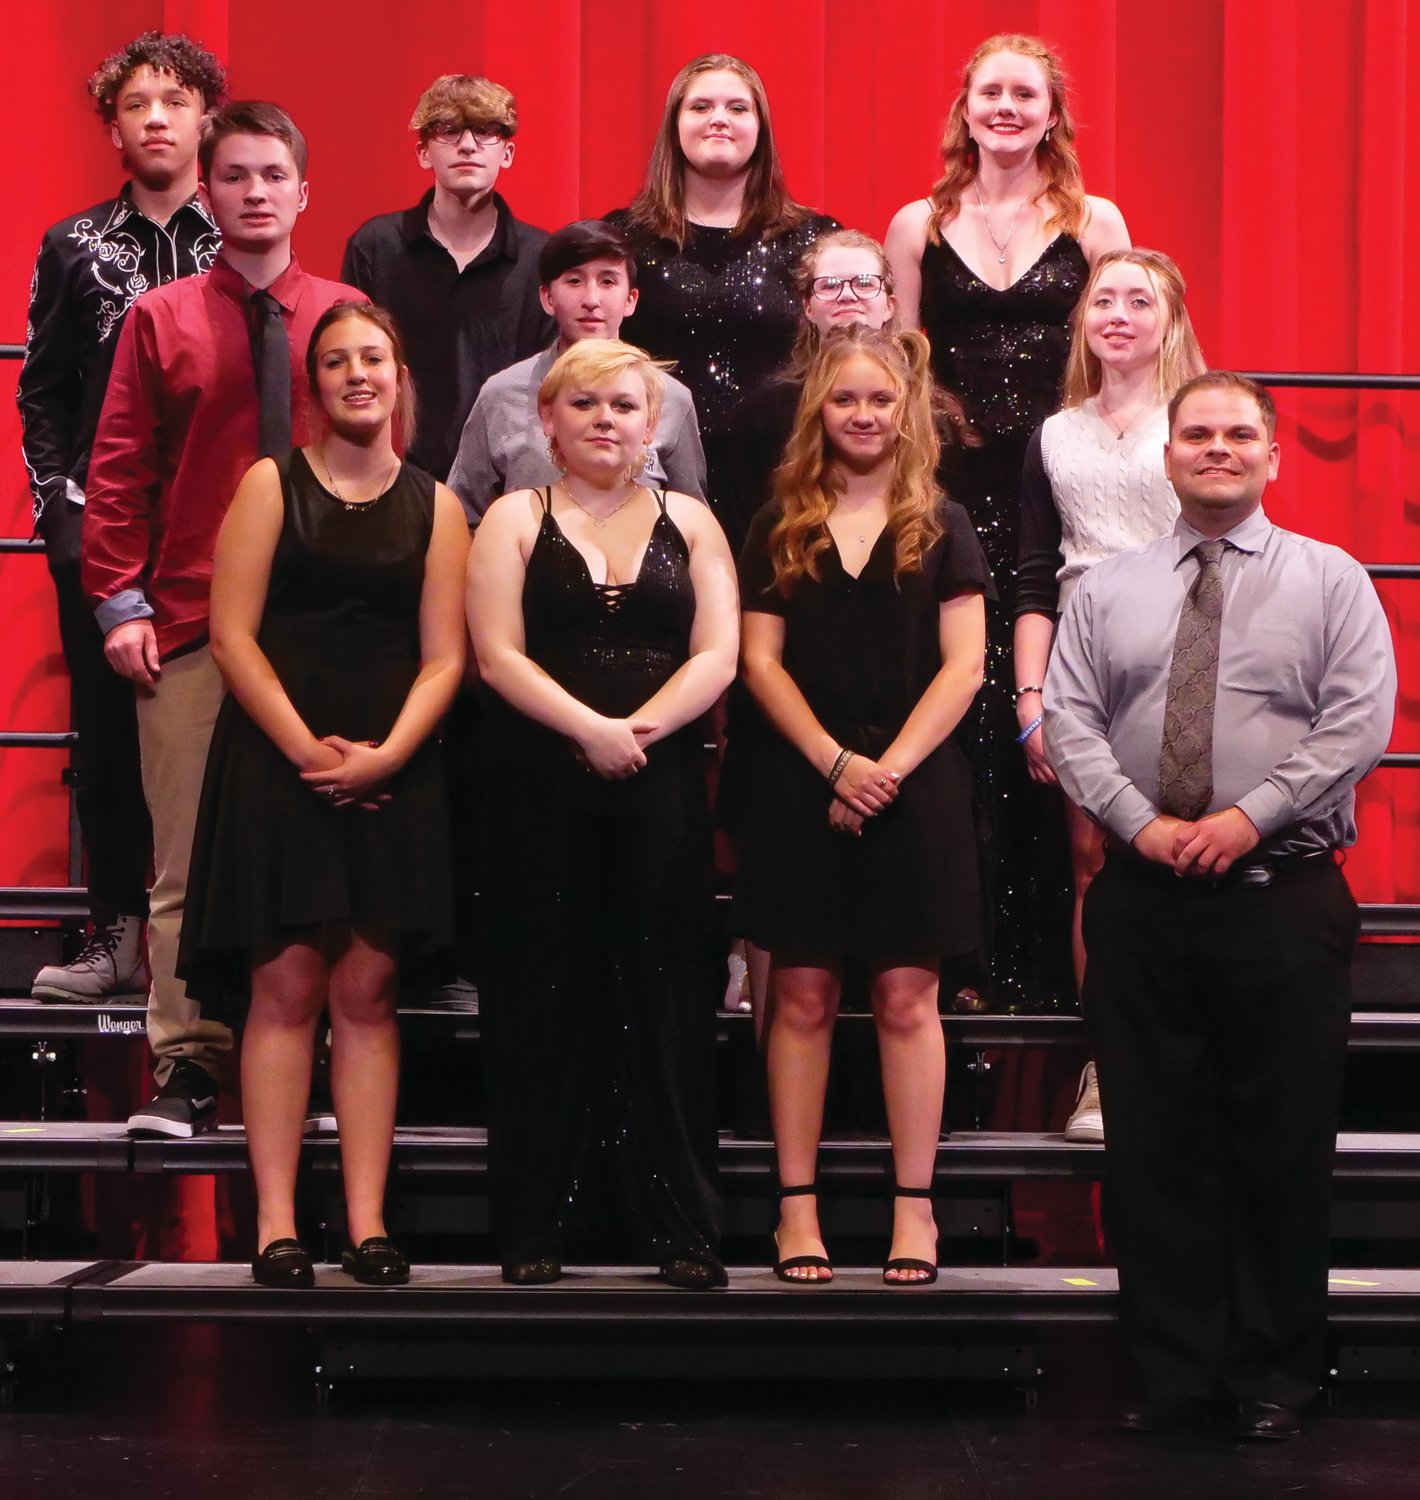 Members of the Parke Heritage High School choir performed Oct. 6 at the annual Wabash River Conference Choral Festival at Seeger High School. Each individual choir performed their own special selection before combining with the choirs from the other WRC schools. Parke Heritage performed “Homeward Bound” by Marta Keen, arranged by Jay Althouse. The guest clinician was Dr. Kelly Ford from Sienna Heights University. Members attending the event were front row, Kim Koren, Evelee Ritter, Jaida Lows and PHHS music director Alec Moeller; middle row, Michael Clingerman, Megan Shockey, Josephine Earl and Breana Ledcke; and back row, Max Hanner, Daniel McIntyre, Shelby Robertson and Jenna McVay.